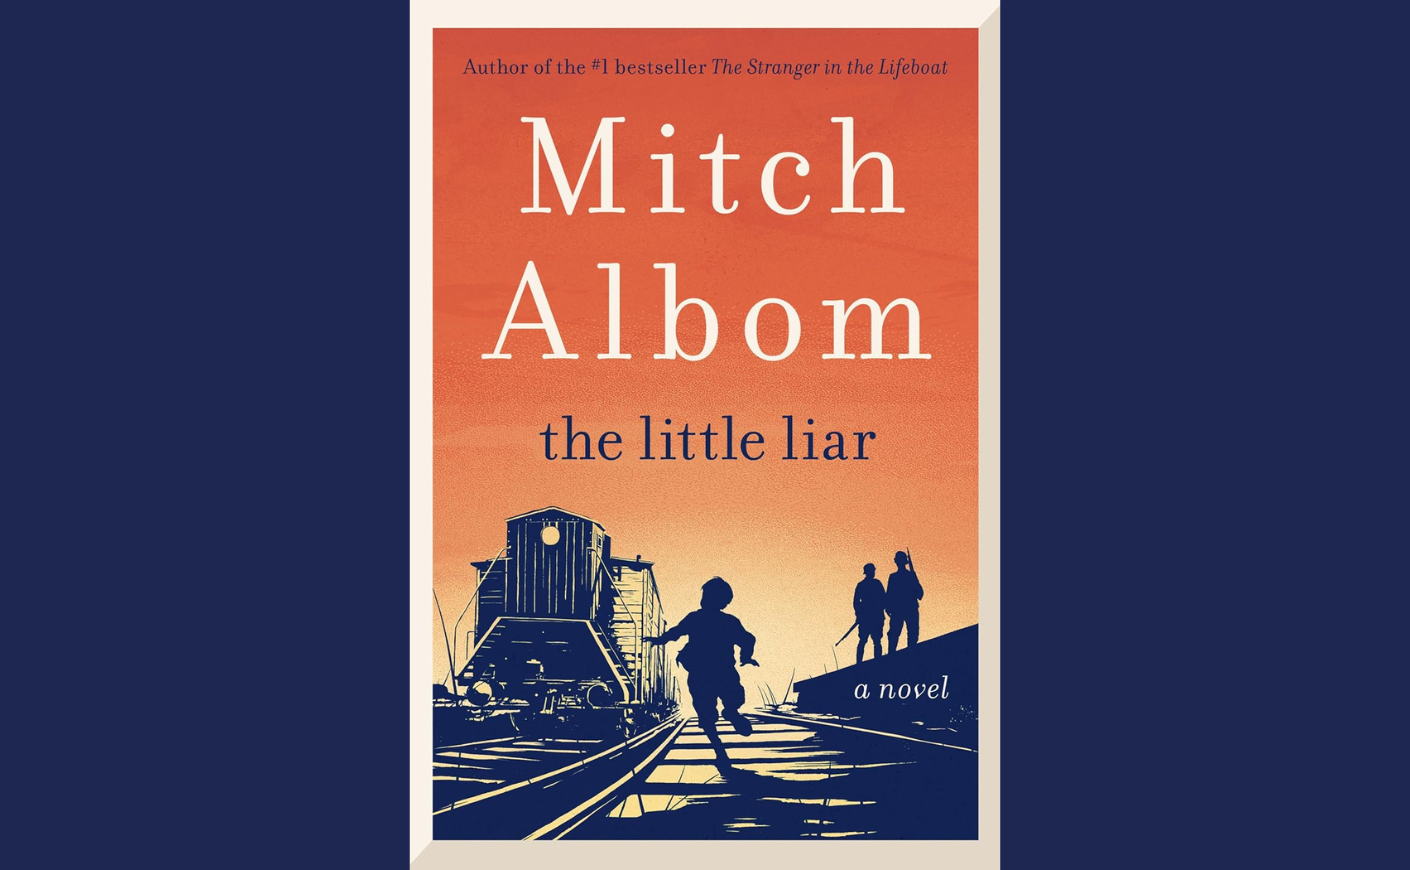 the little liar by mitch albom book cover